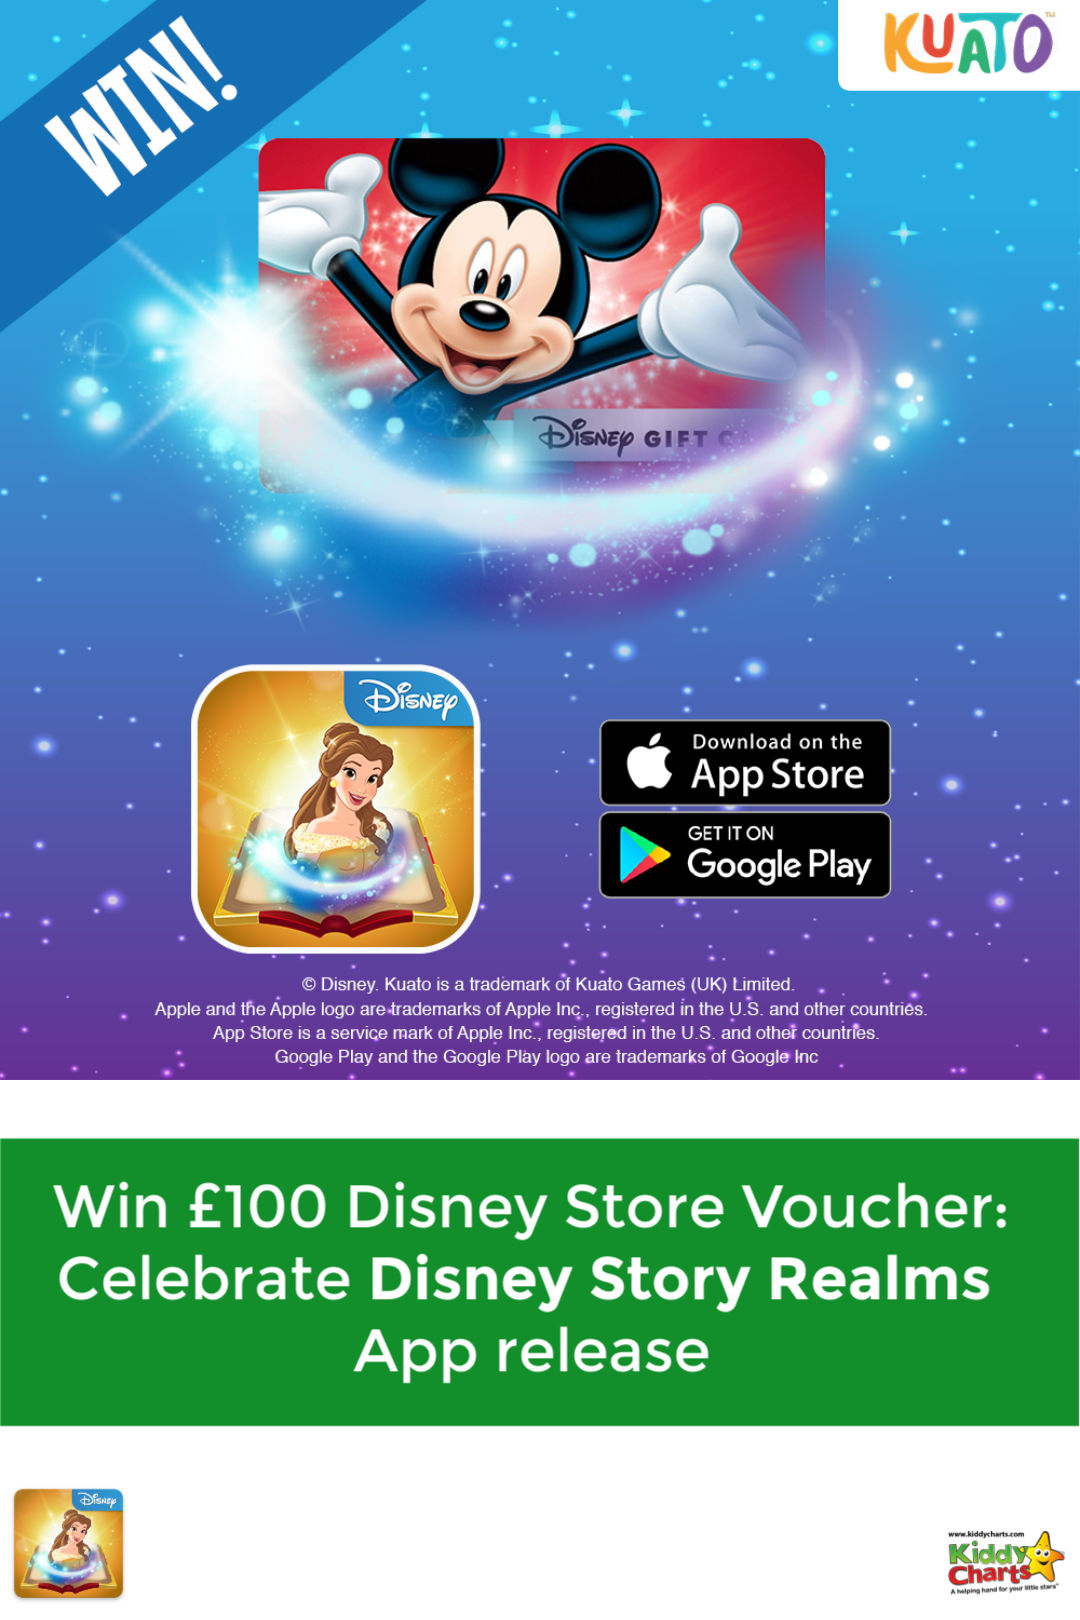 We have £100 Disney Voucher to give away to celebrate the Disney Story Realms App release; pop over and try and win! #giveaways #win #disney